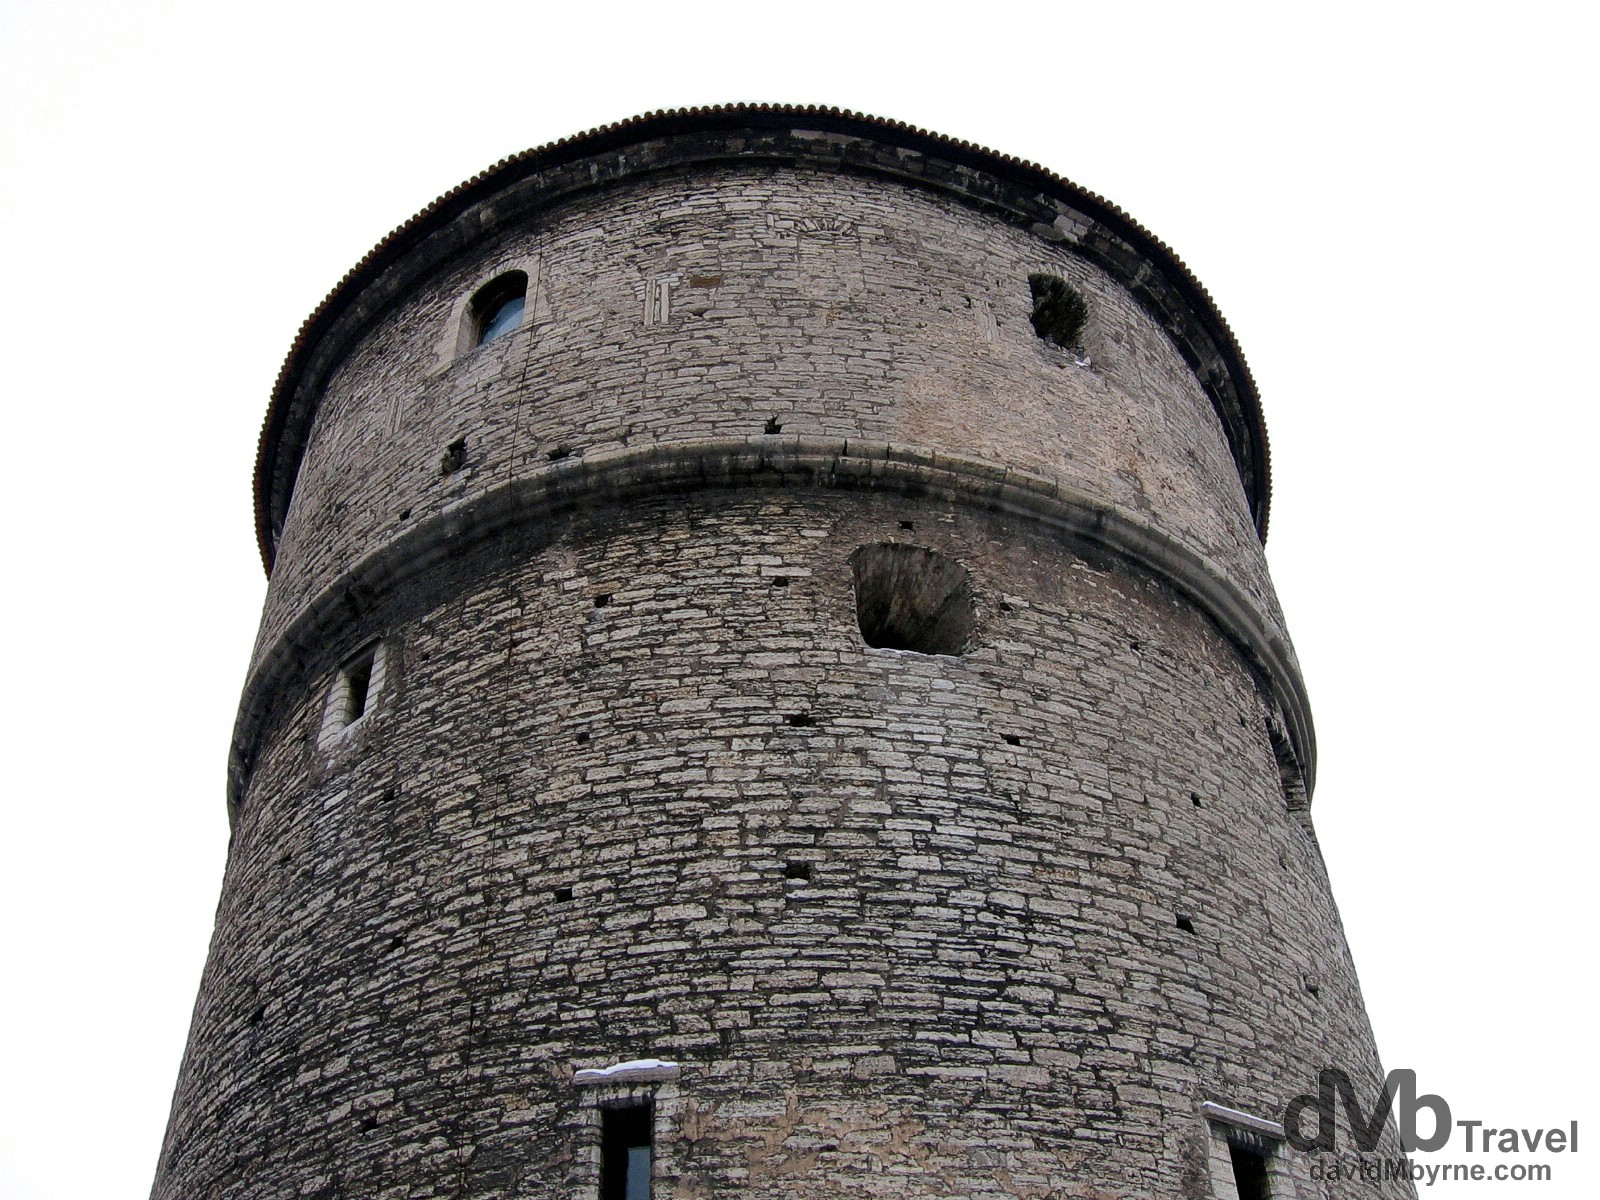 A tower of the medieval Old Town of Tallinn, Estonia. March 2, 2006. 